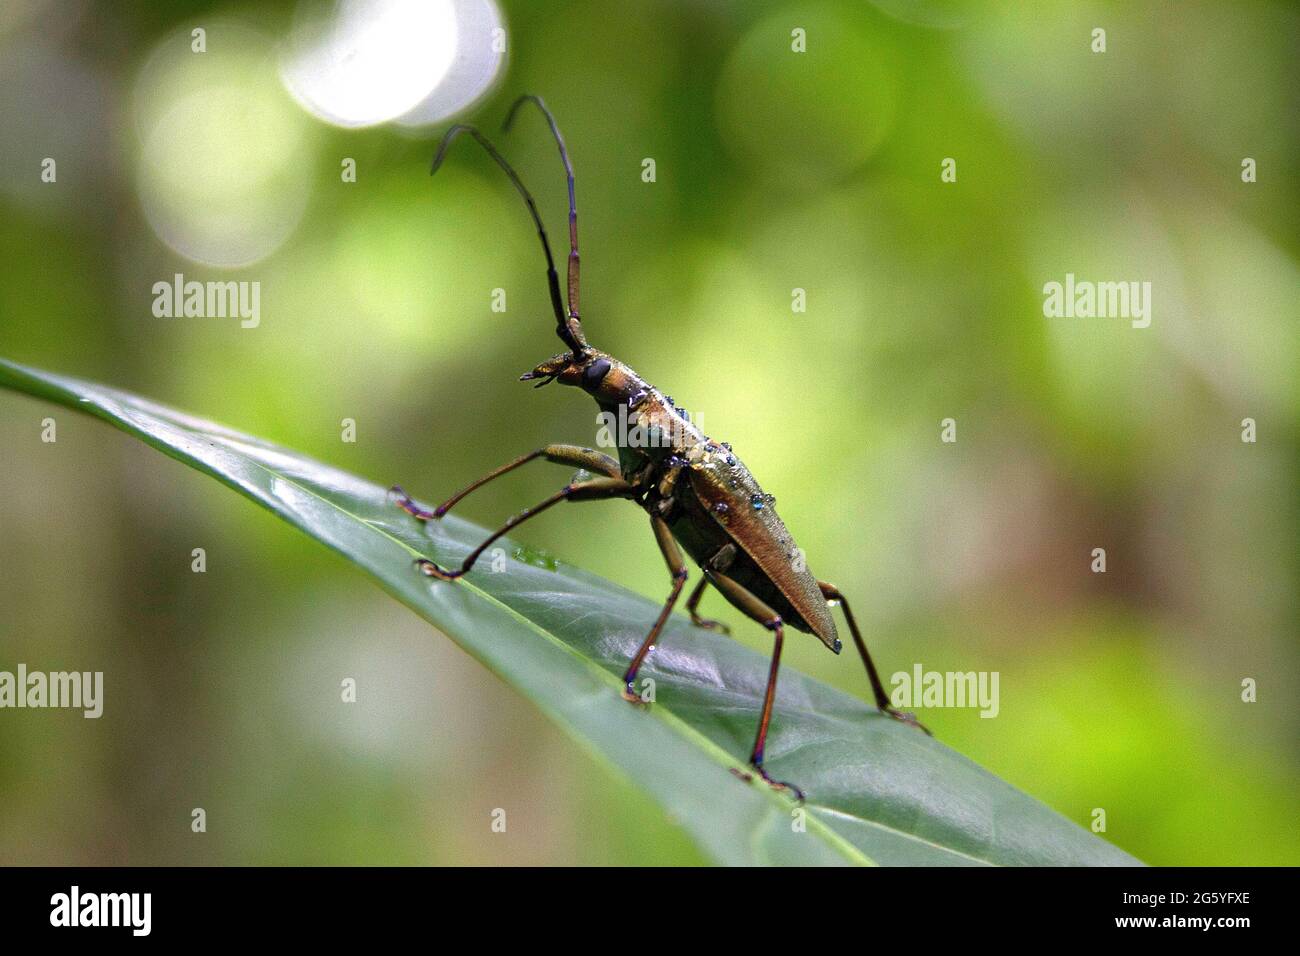 A real long-horned beetle stands on a leaf looking almost like a metal sculpture in nature. Stock Photo